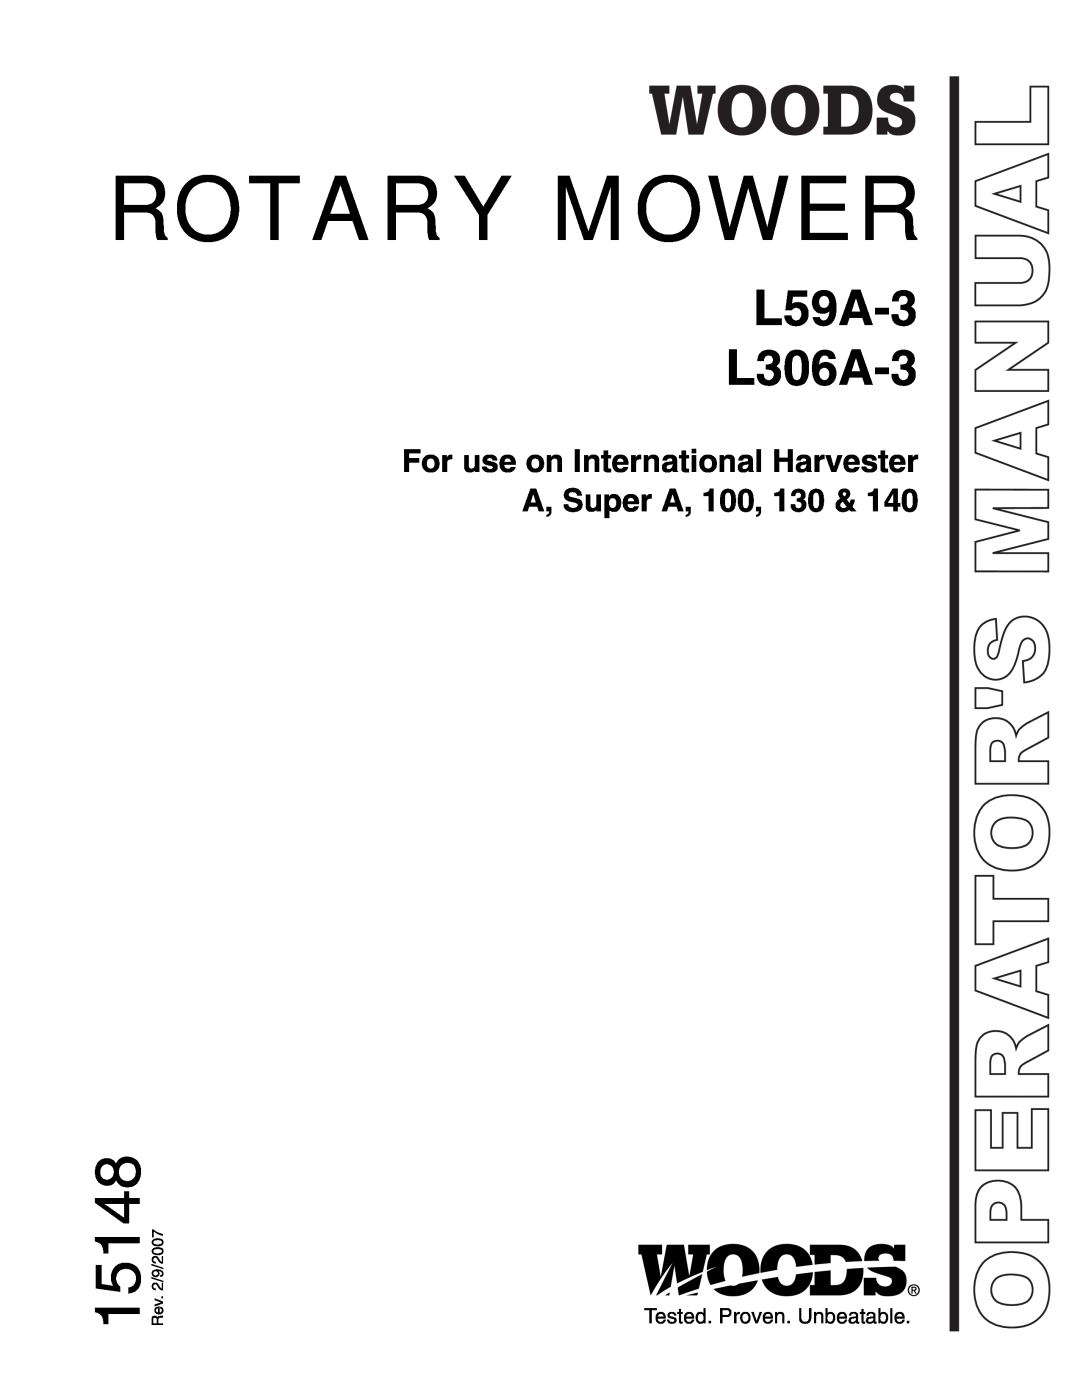 Woods Equipment manual For use on International Harvester A, Super A, 100, Rotary Mower, 15148, L59A-3 L306A-3 